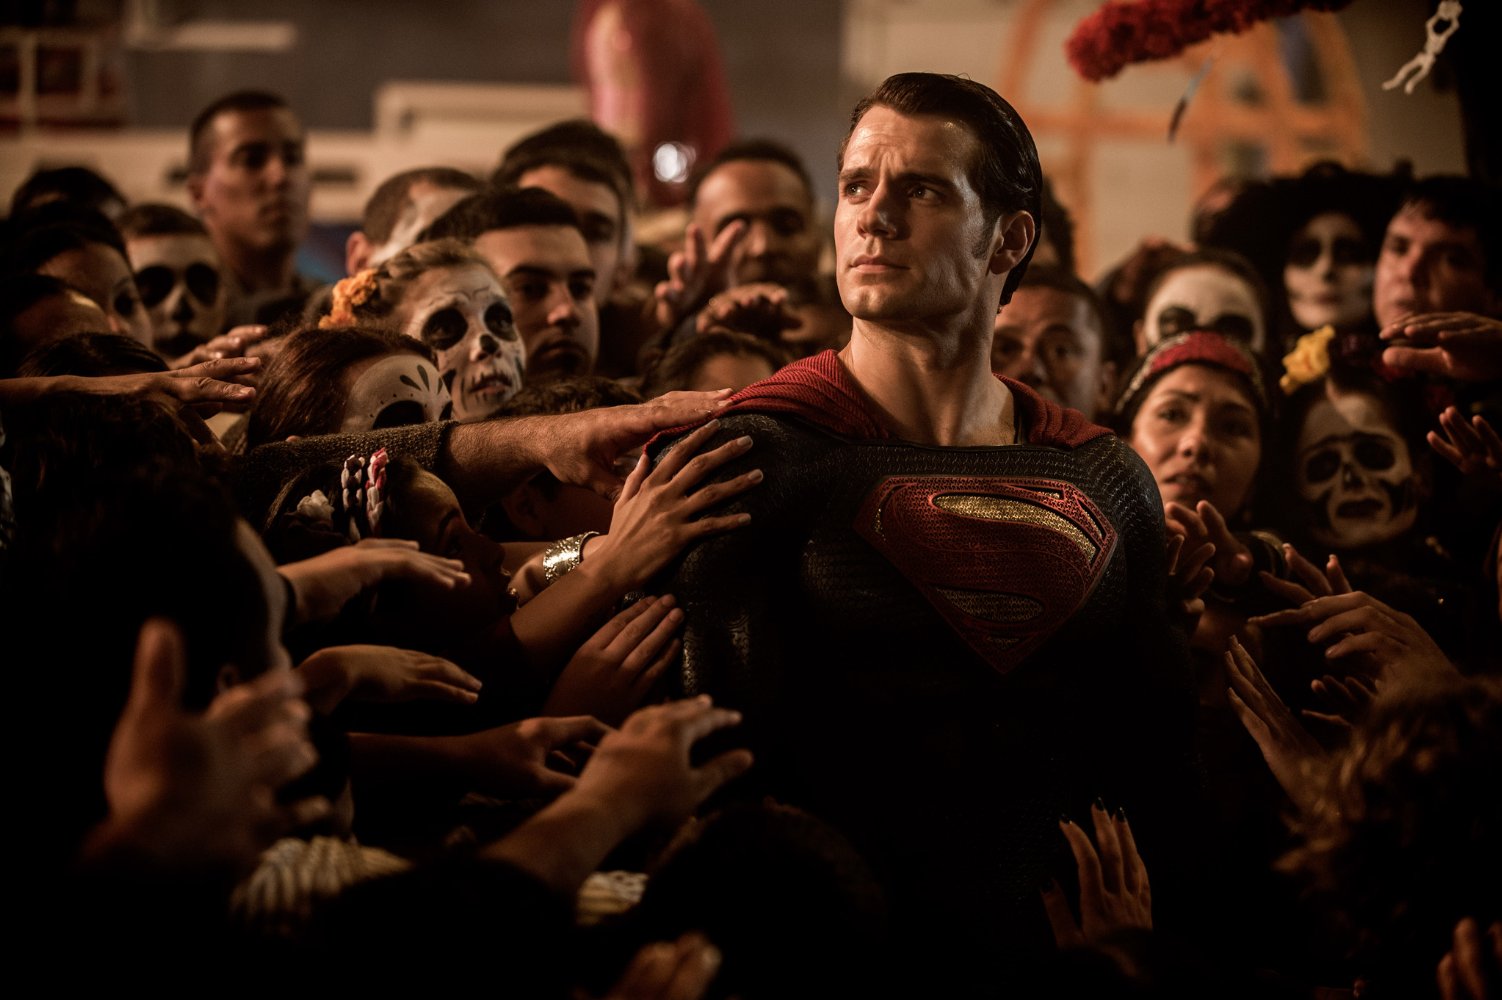 Superman amidst the crowd